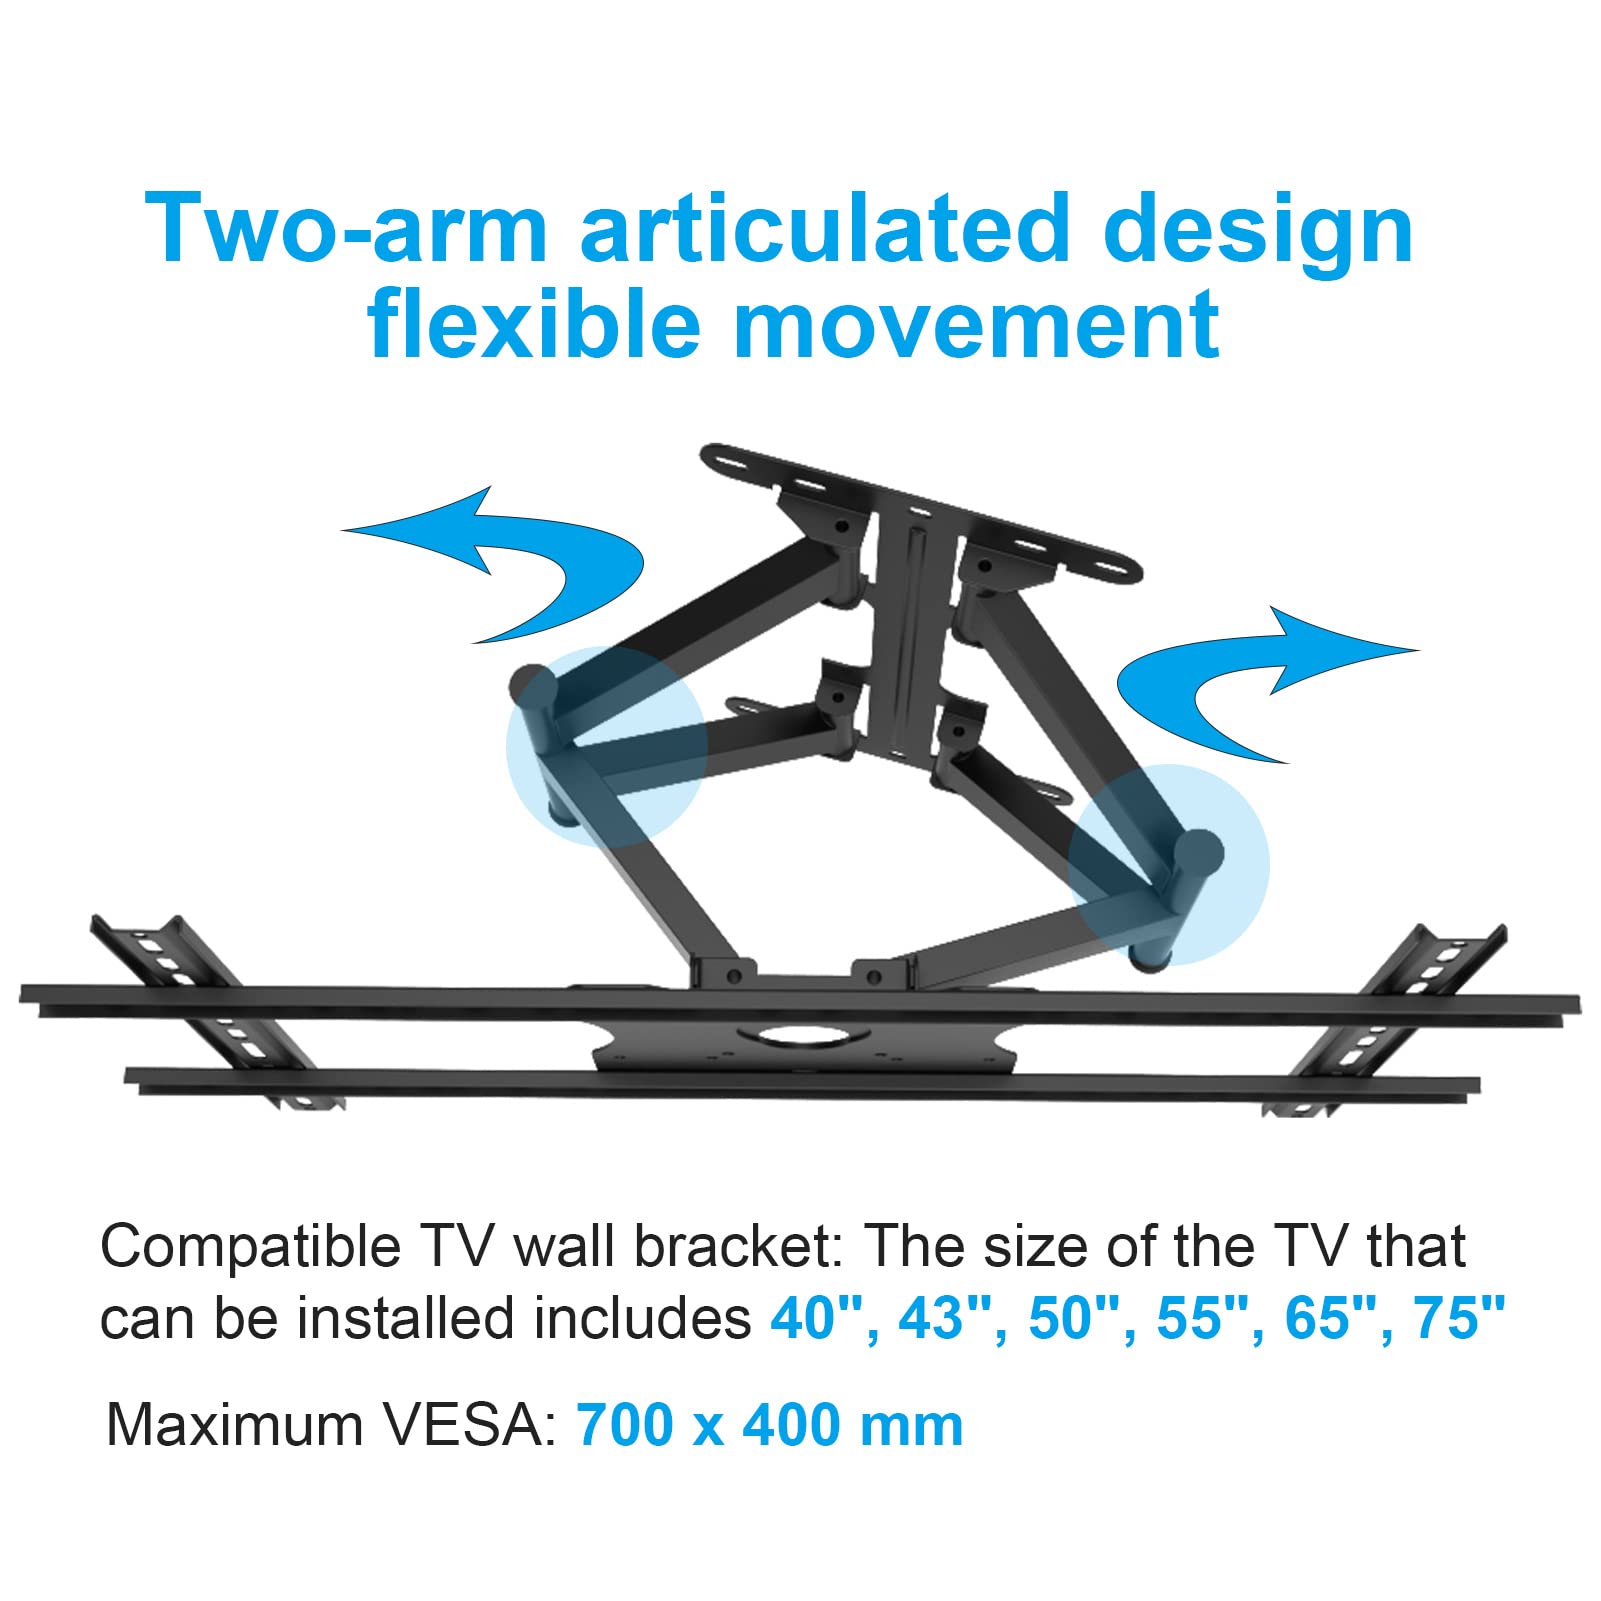 SYLVOX Full Motion Outdoor TV Wall Mount, Fits for TV Size from 40 Inch to 75 Inch, Flexible 6 Articulating Dual Arms, Wall Mount Bracket, Maximum VESA 700 x 400 mm